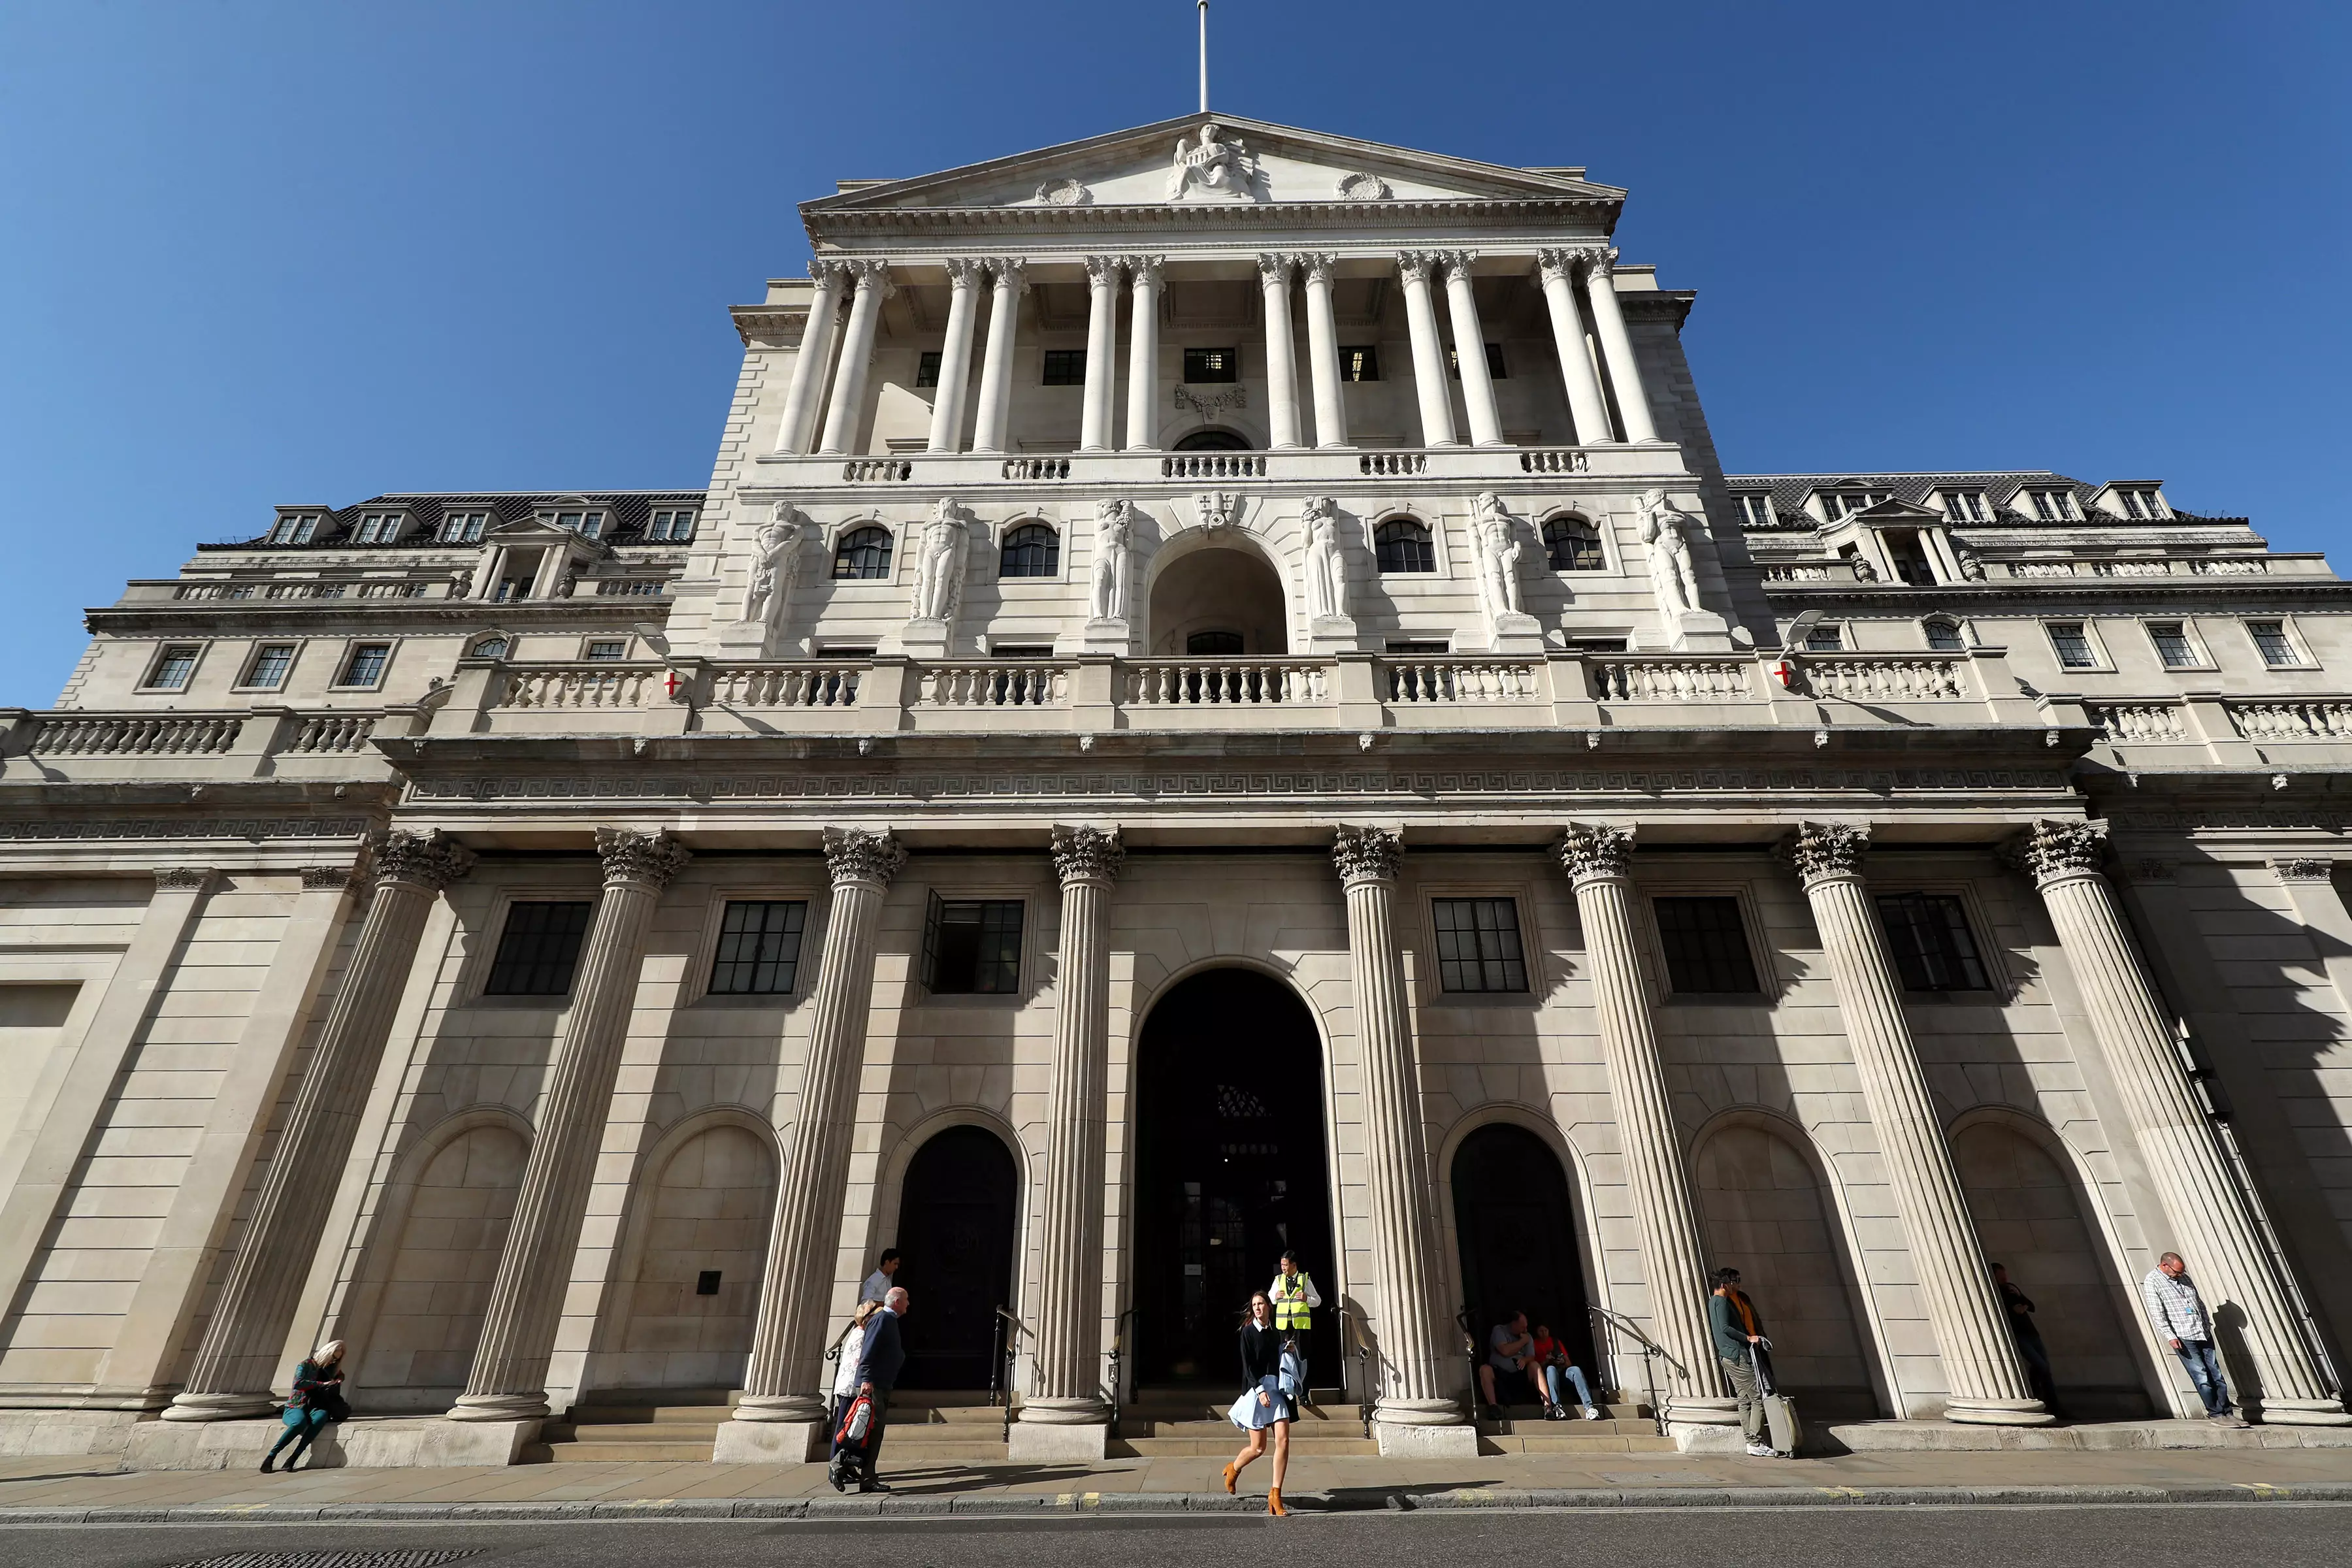 Figures from the Bank of England show £18.5 billion was put into savings accounts in January.